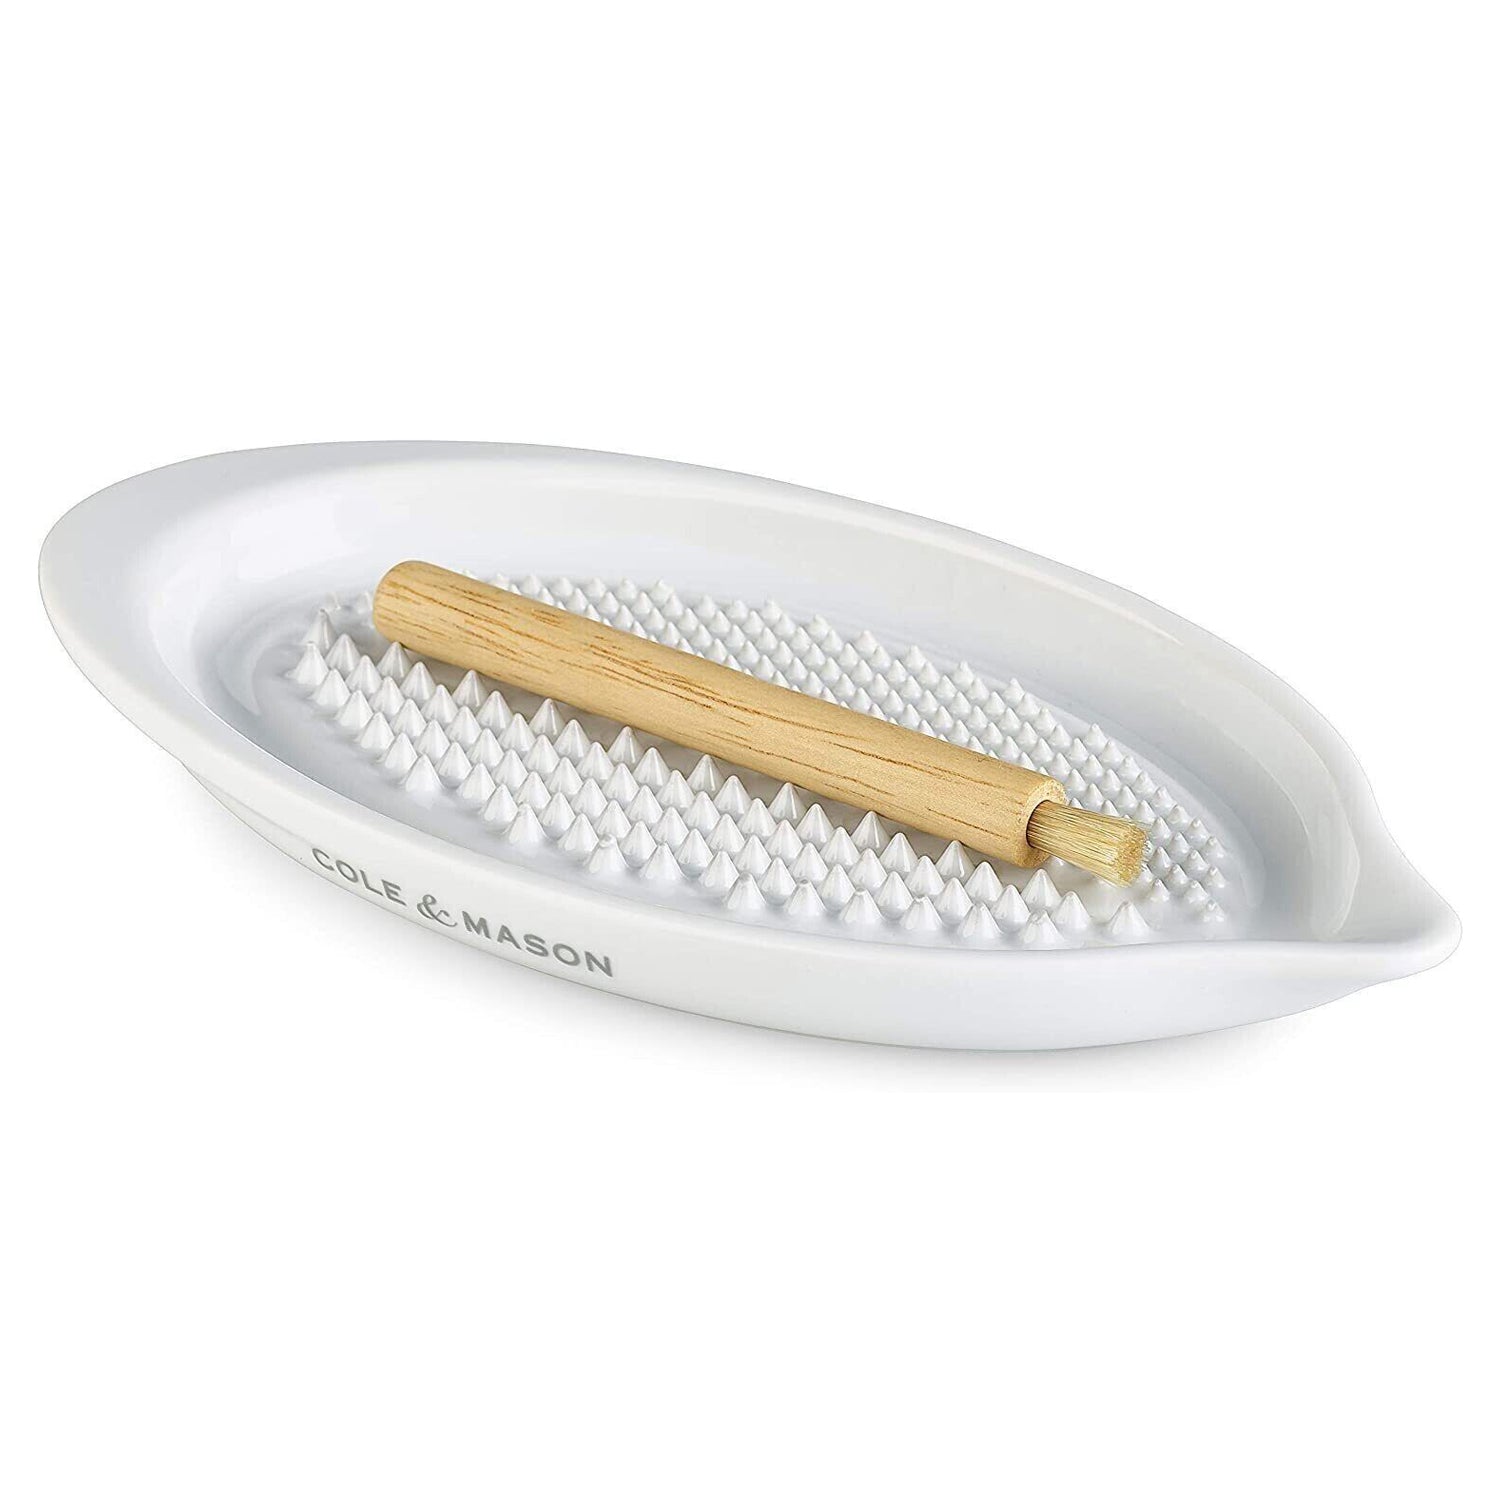 Cole & Mason Ceramic Grater Plate With Wooden Brush Set - White